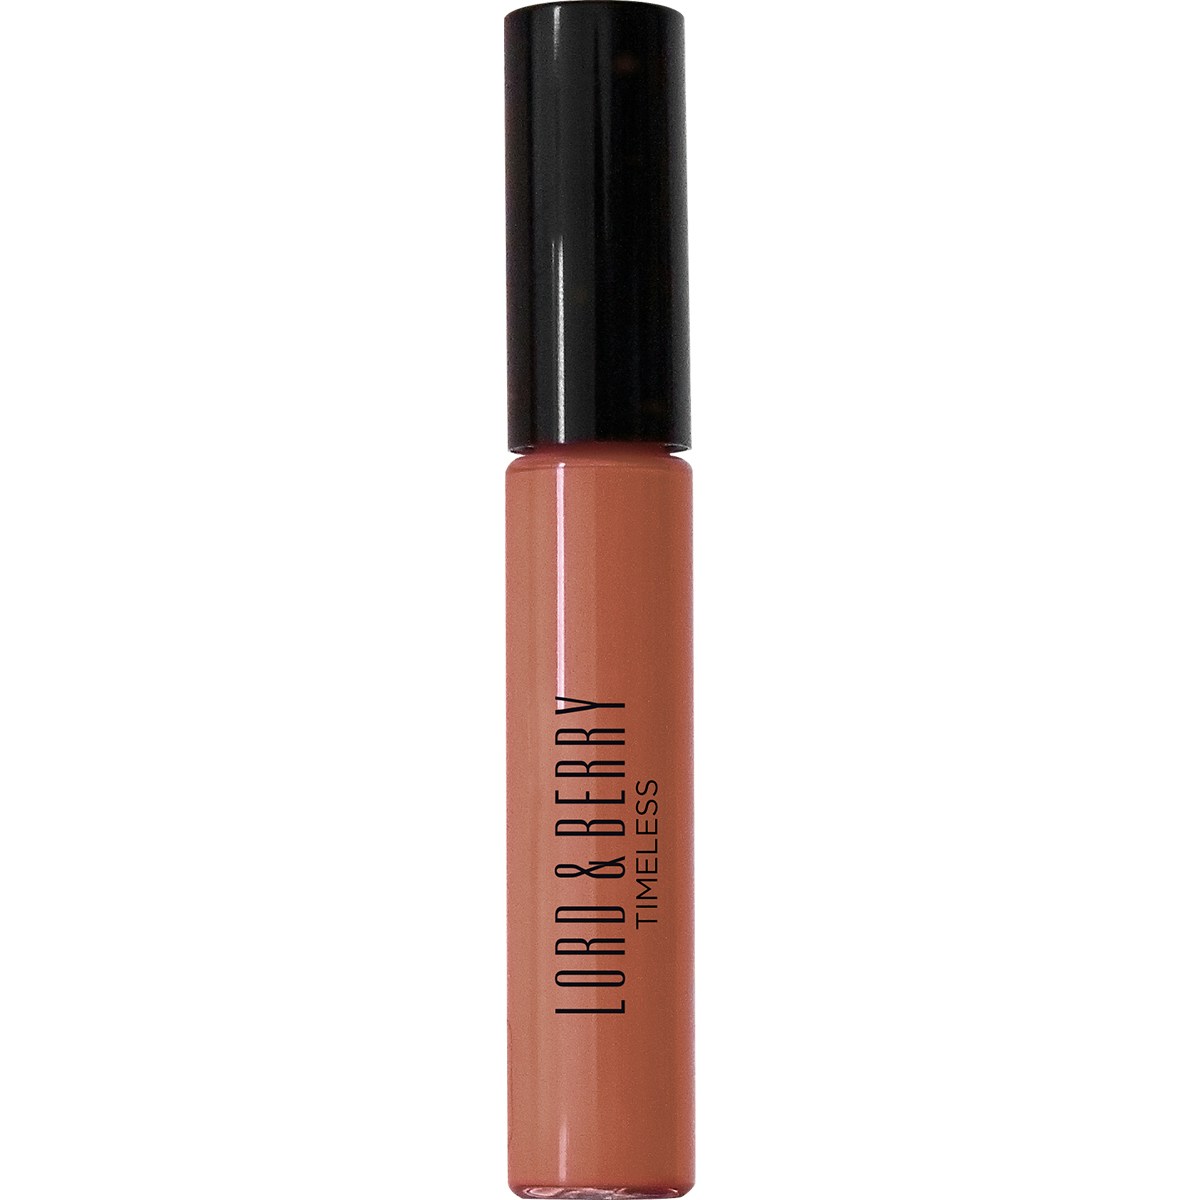 Lord & Berry Lips Lord and Berry Timeless Kissproof Lipsticks 7g Perfect Nude